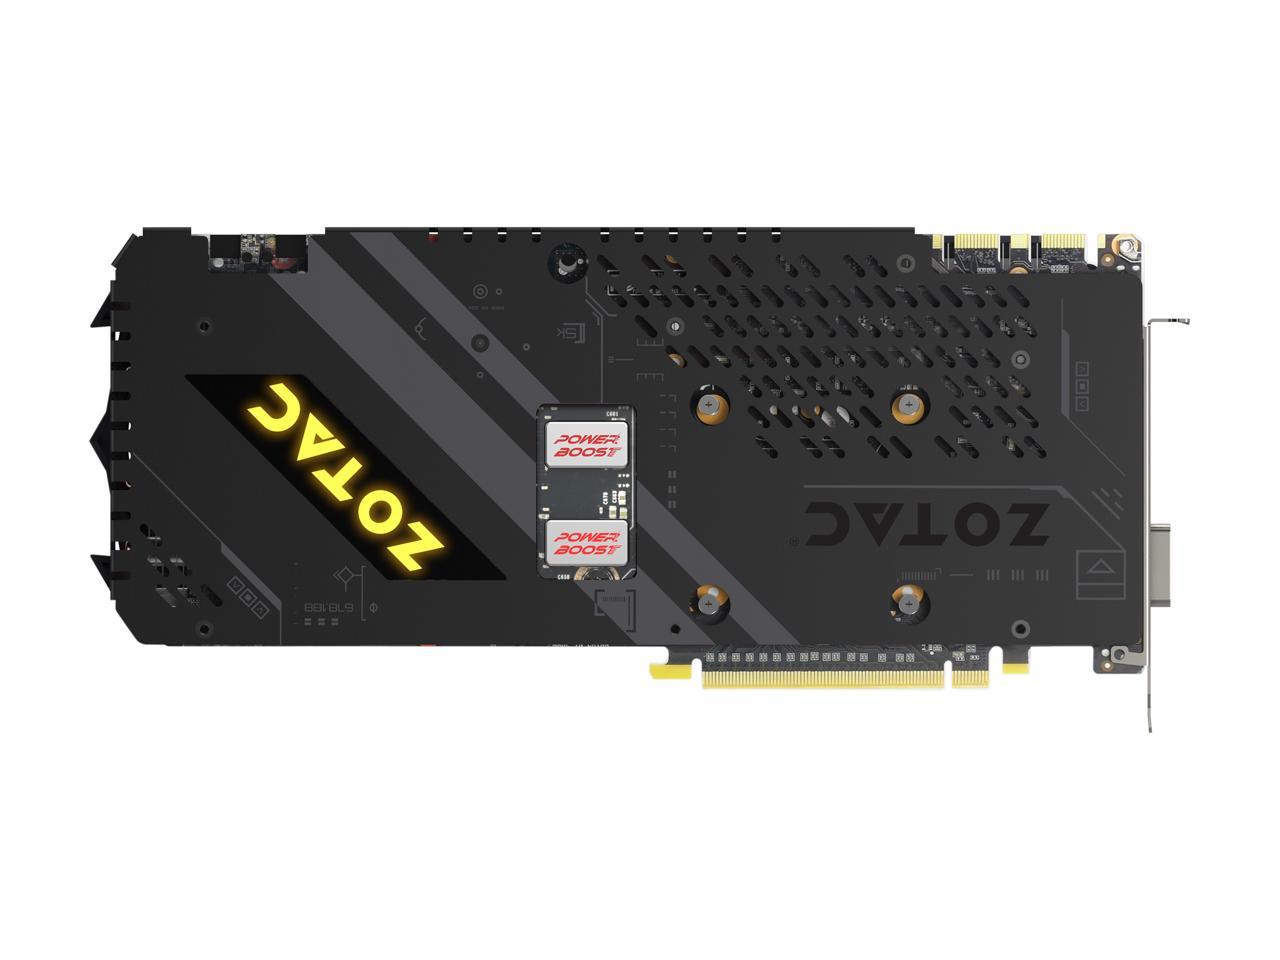 Zotac Geforce Gtx 1080 Ti Amp Extreme 11gb Gddr5x 352 Bit Gaming Graphics Card Vr Ready 16 2 Power Phase Freeze Fan Stop Icestorm Cooling Spectra Lighting Zt Pc 10p Newegg Com